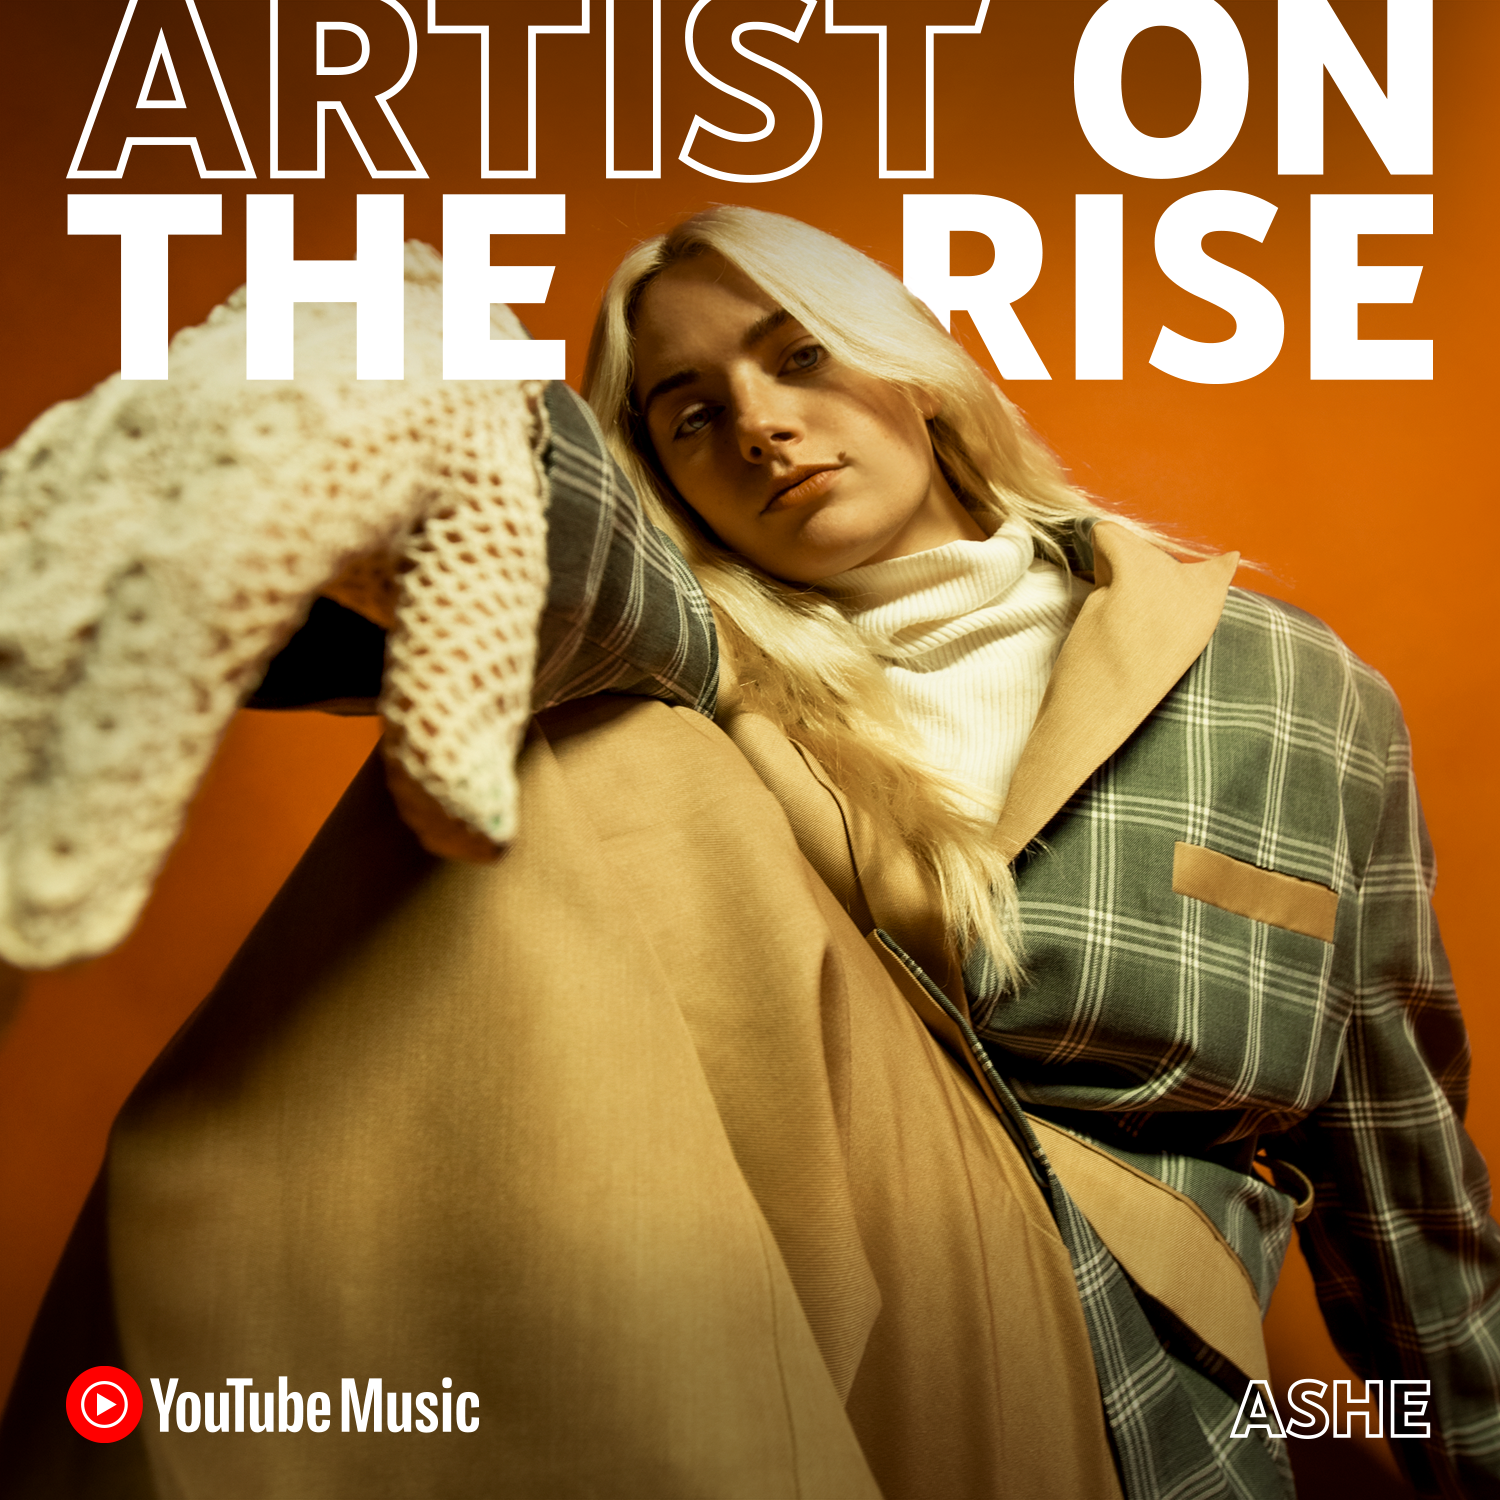 Meet Ashe, our next 2021 Artist on the Rise